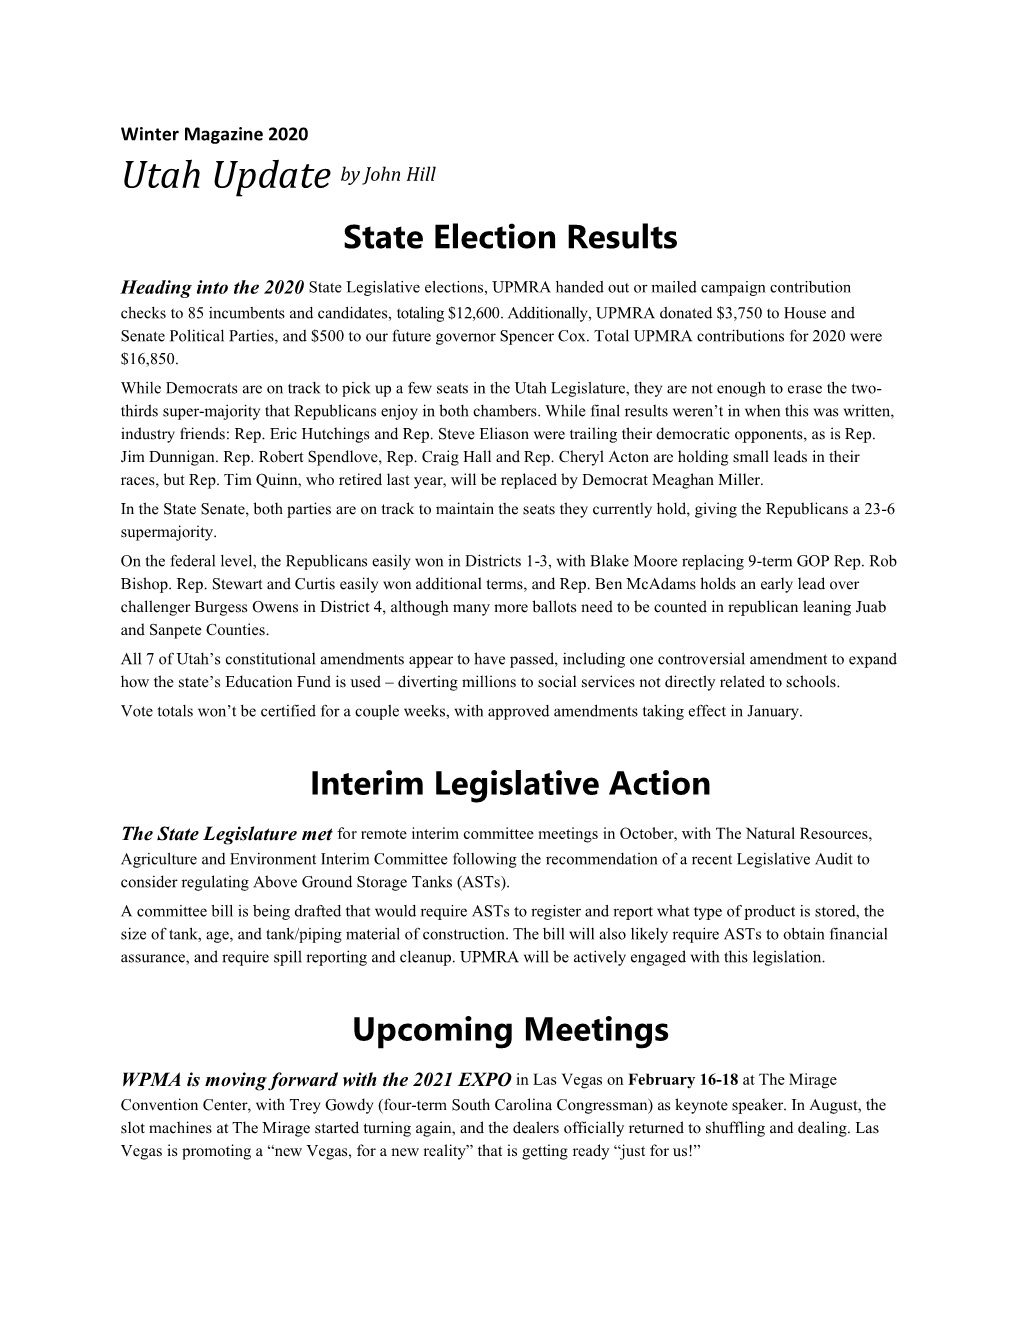 Utah Update by John Hill State Election Results